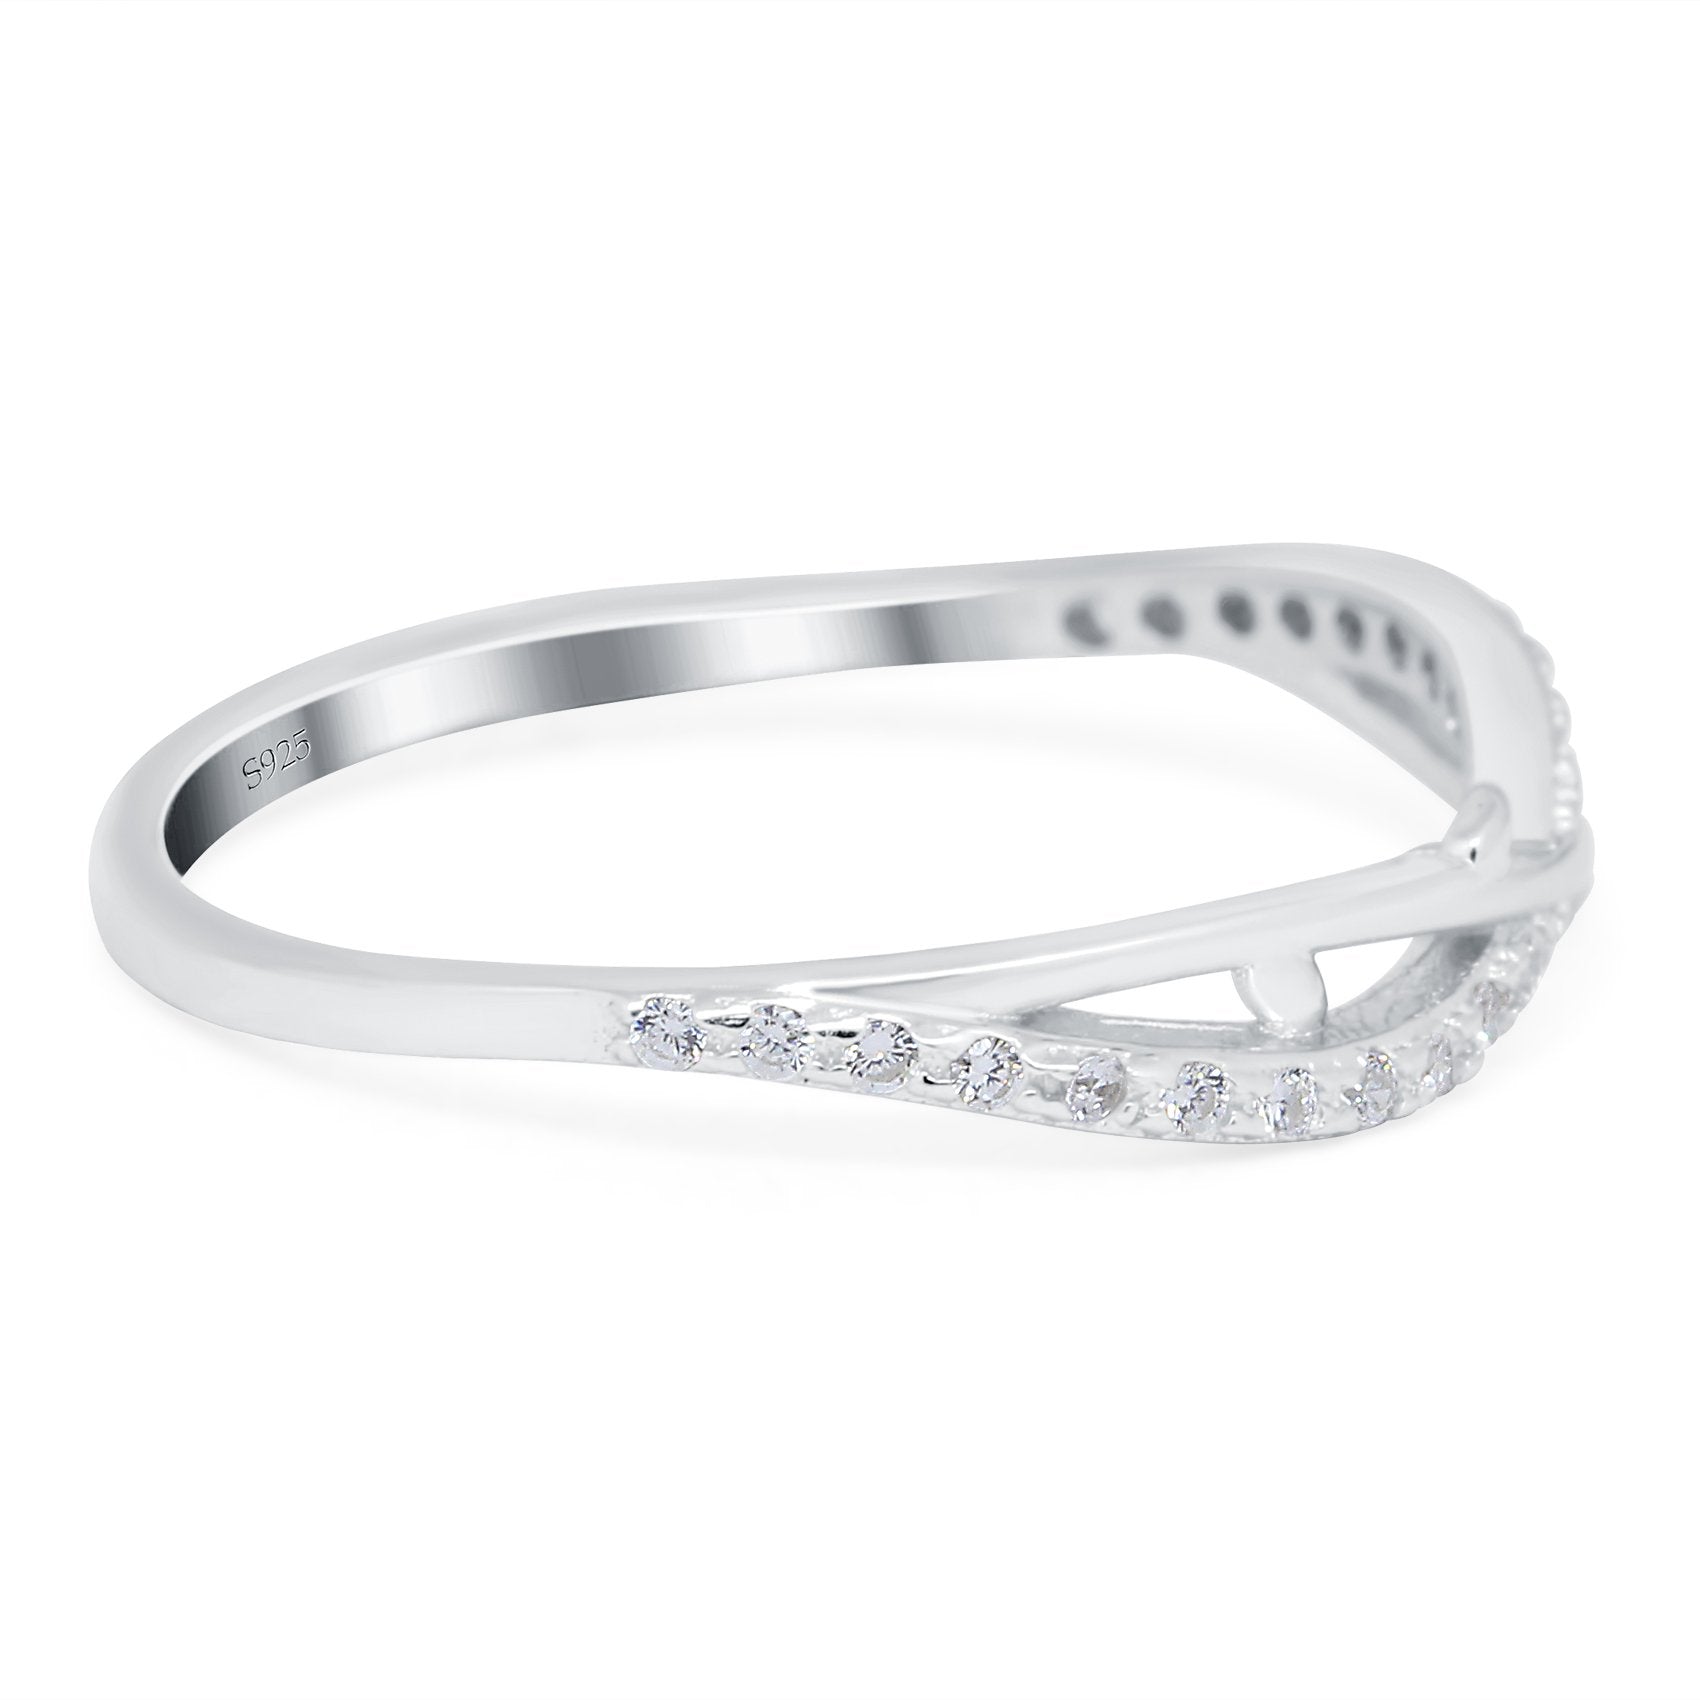 Fashion Crisscross Half Eternity Ring Band Round 4mm Simulated Cubic Zirconia 925 Sterling Silver